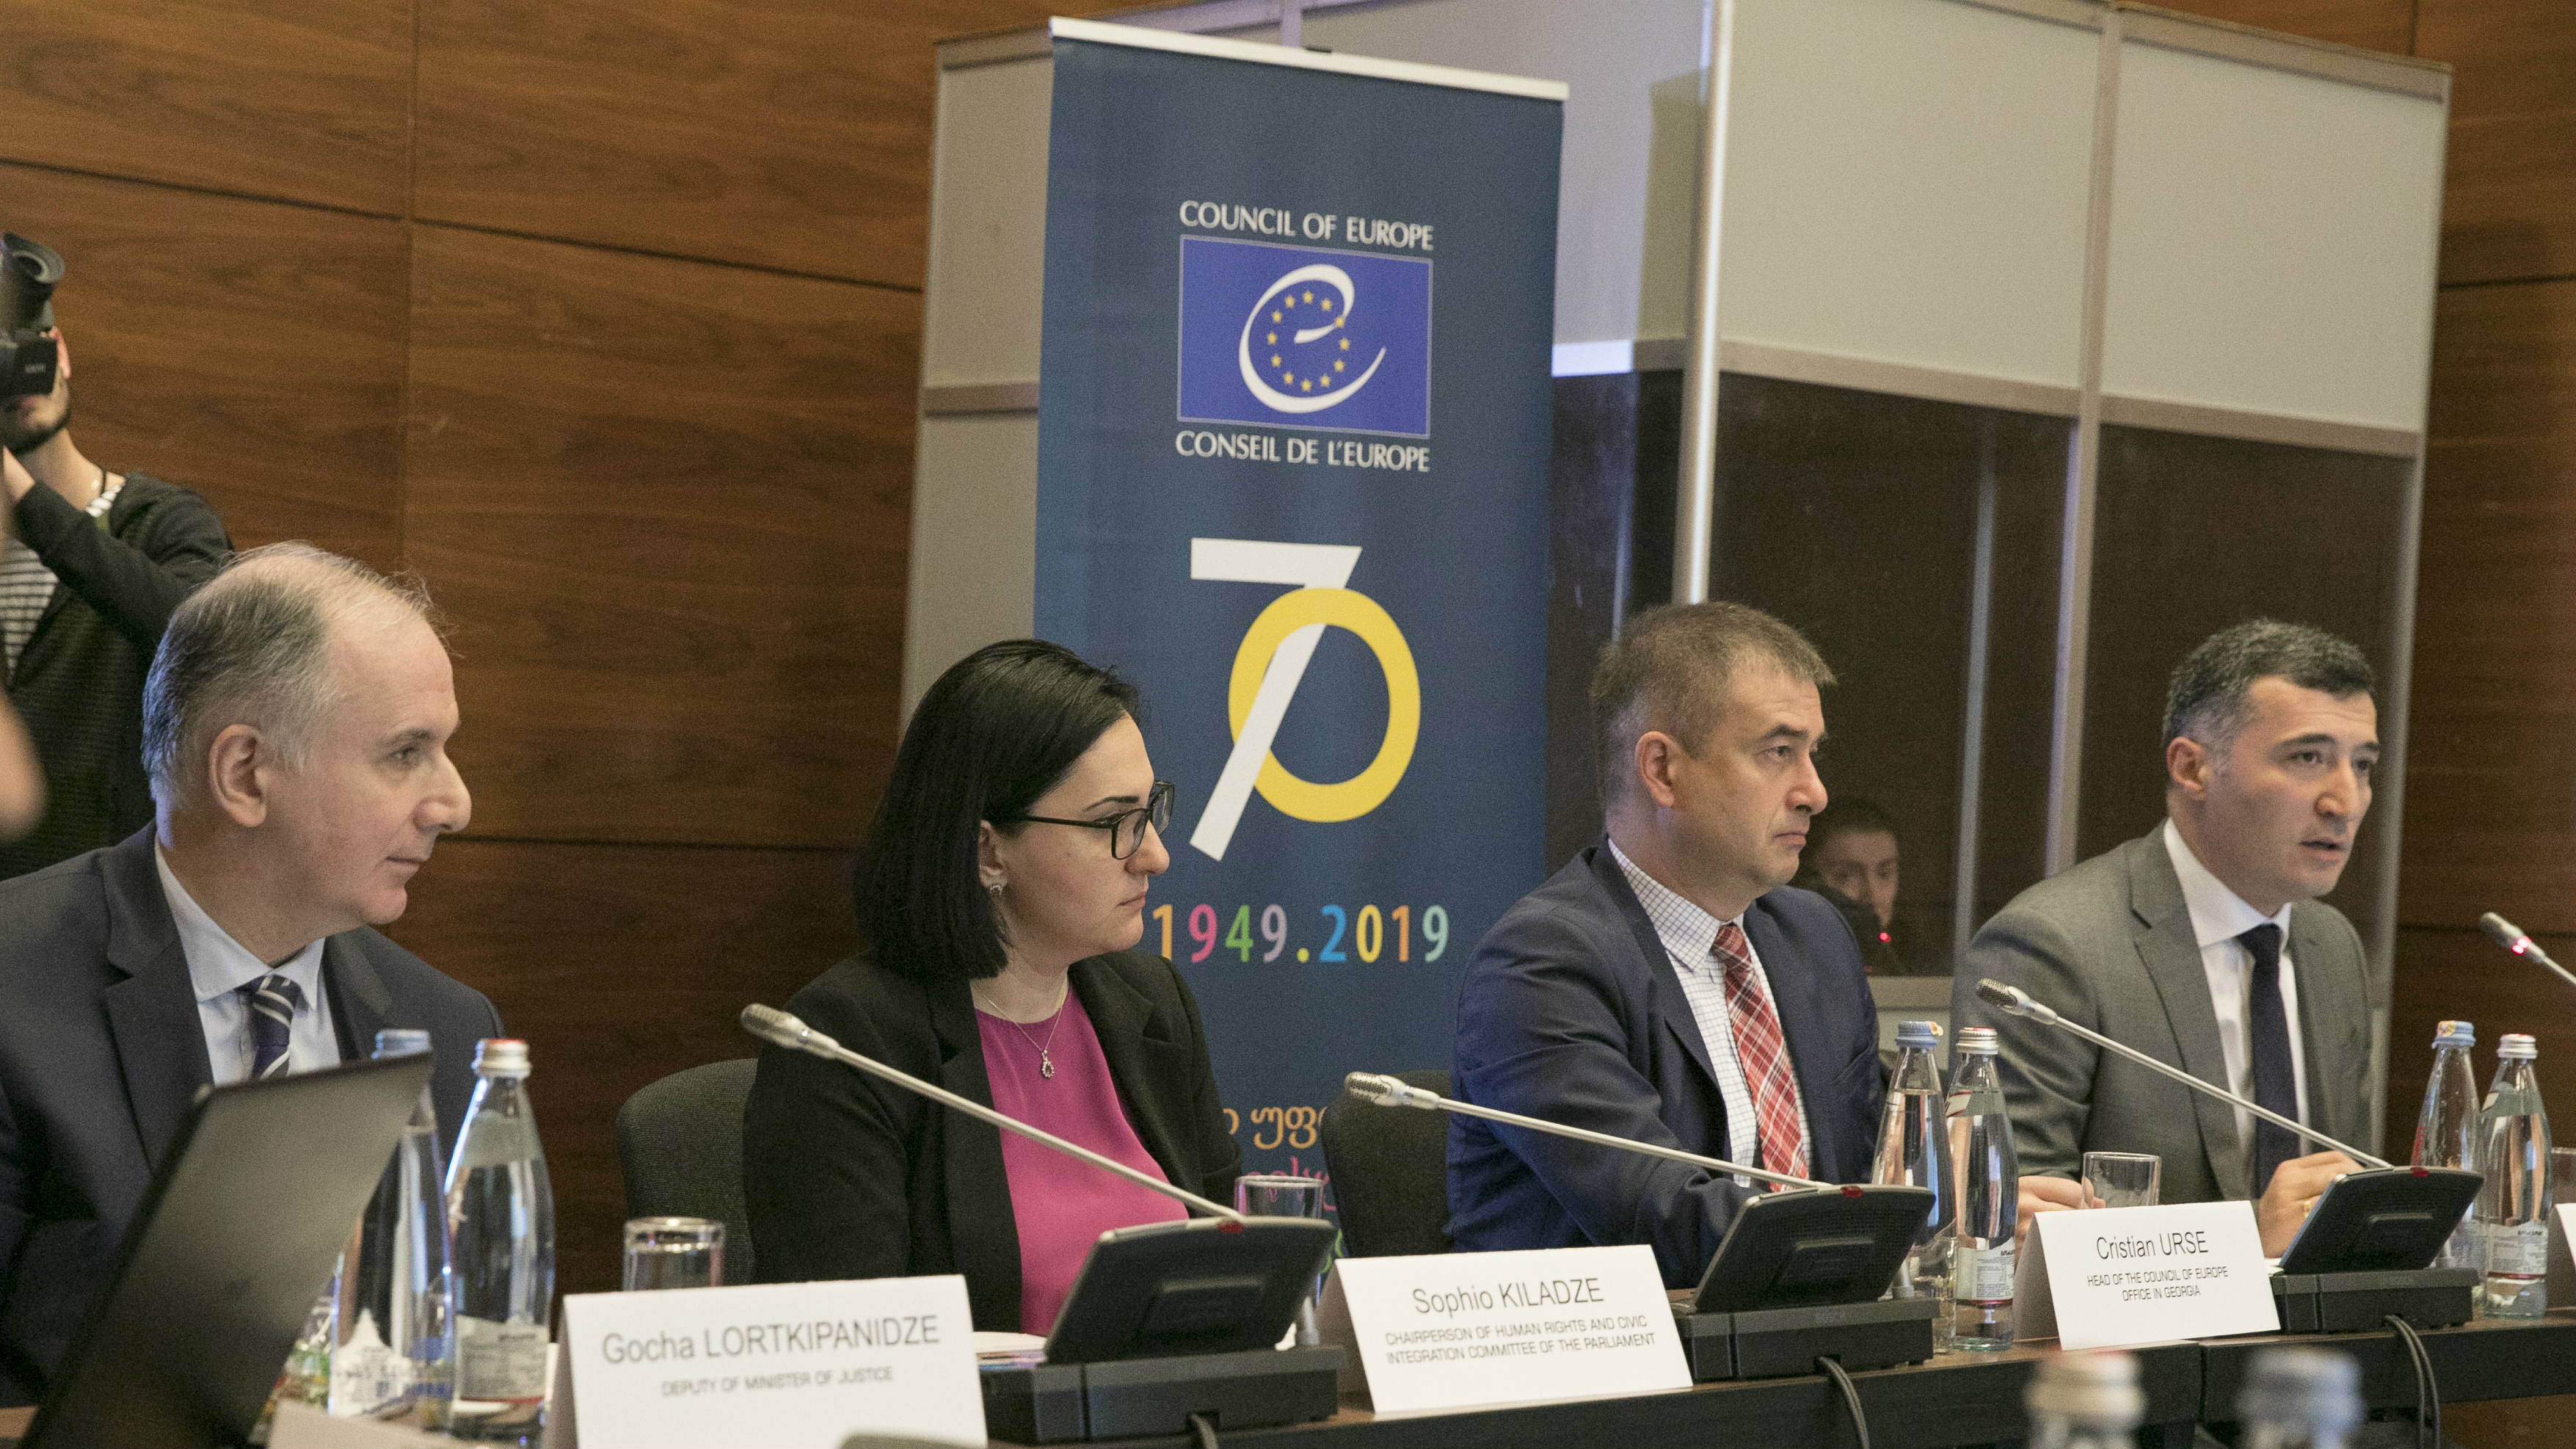 Launch of the Council of Europe project  “Supporting Parliamentary Oversight over Execution of the European Court Judgments in Georgia”